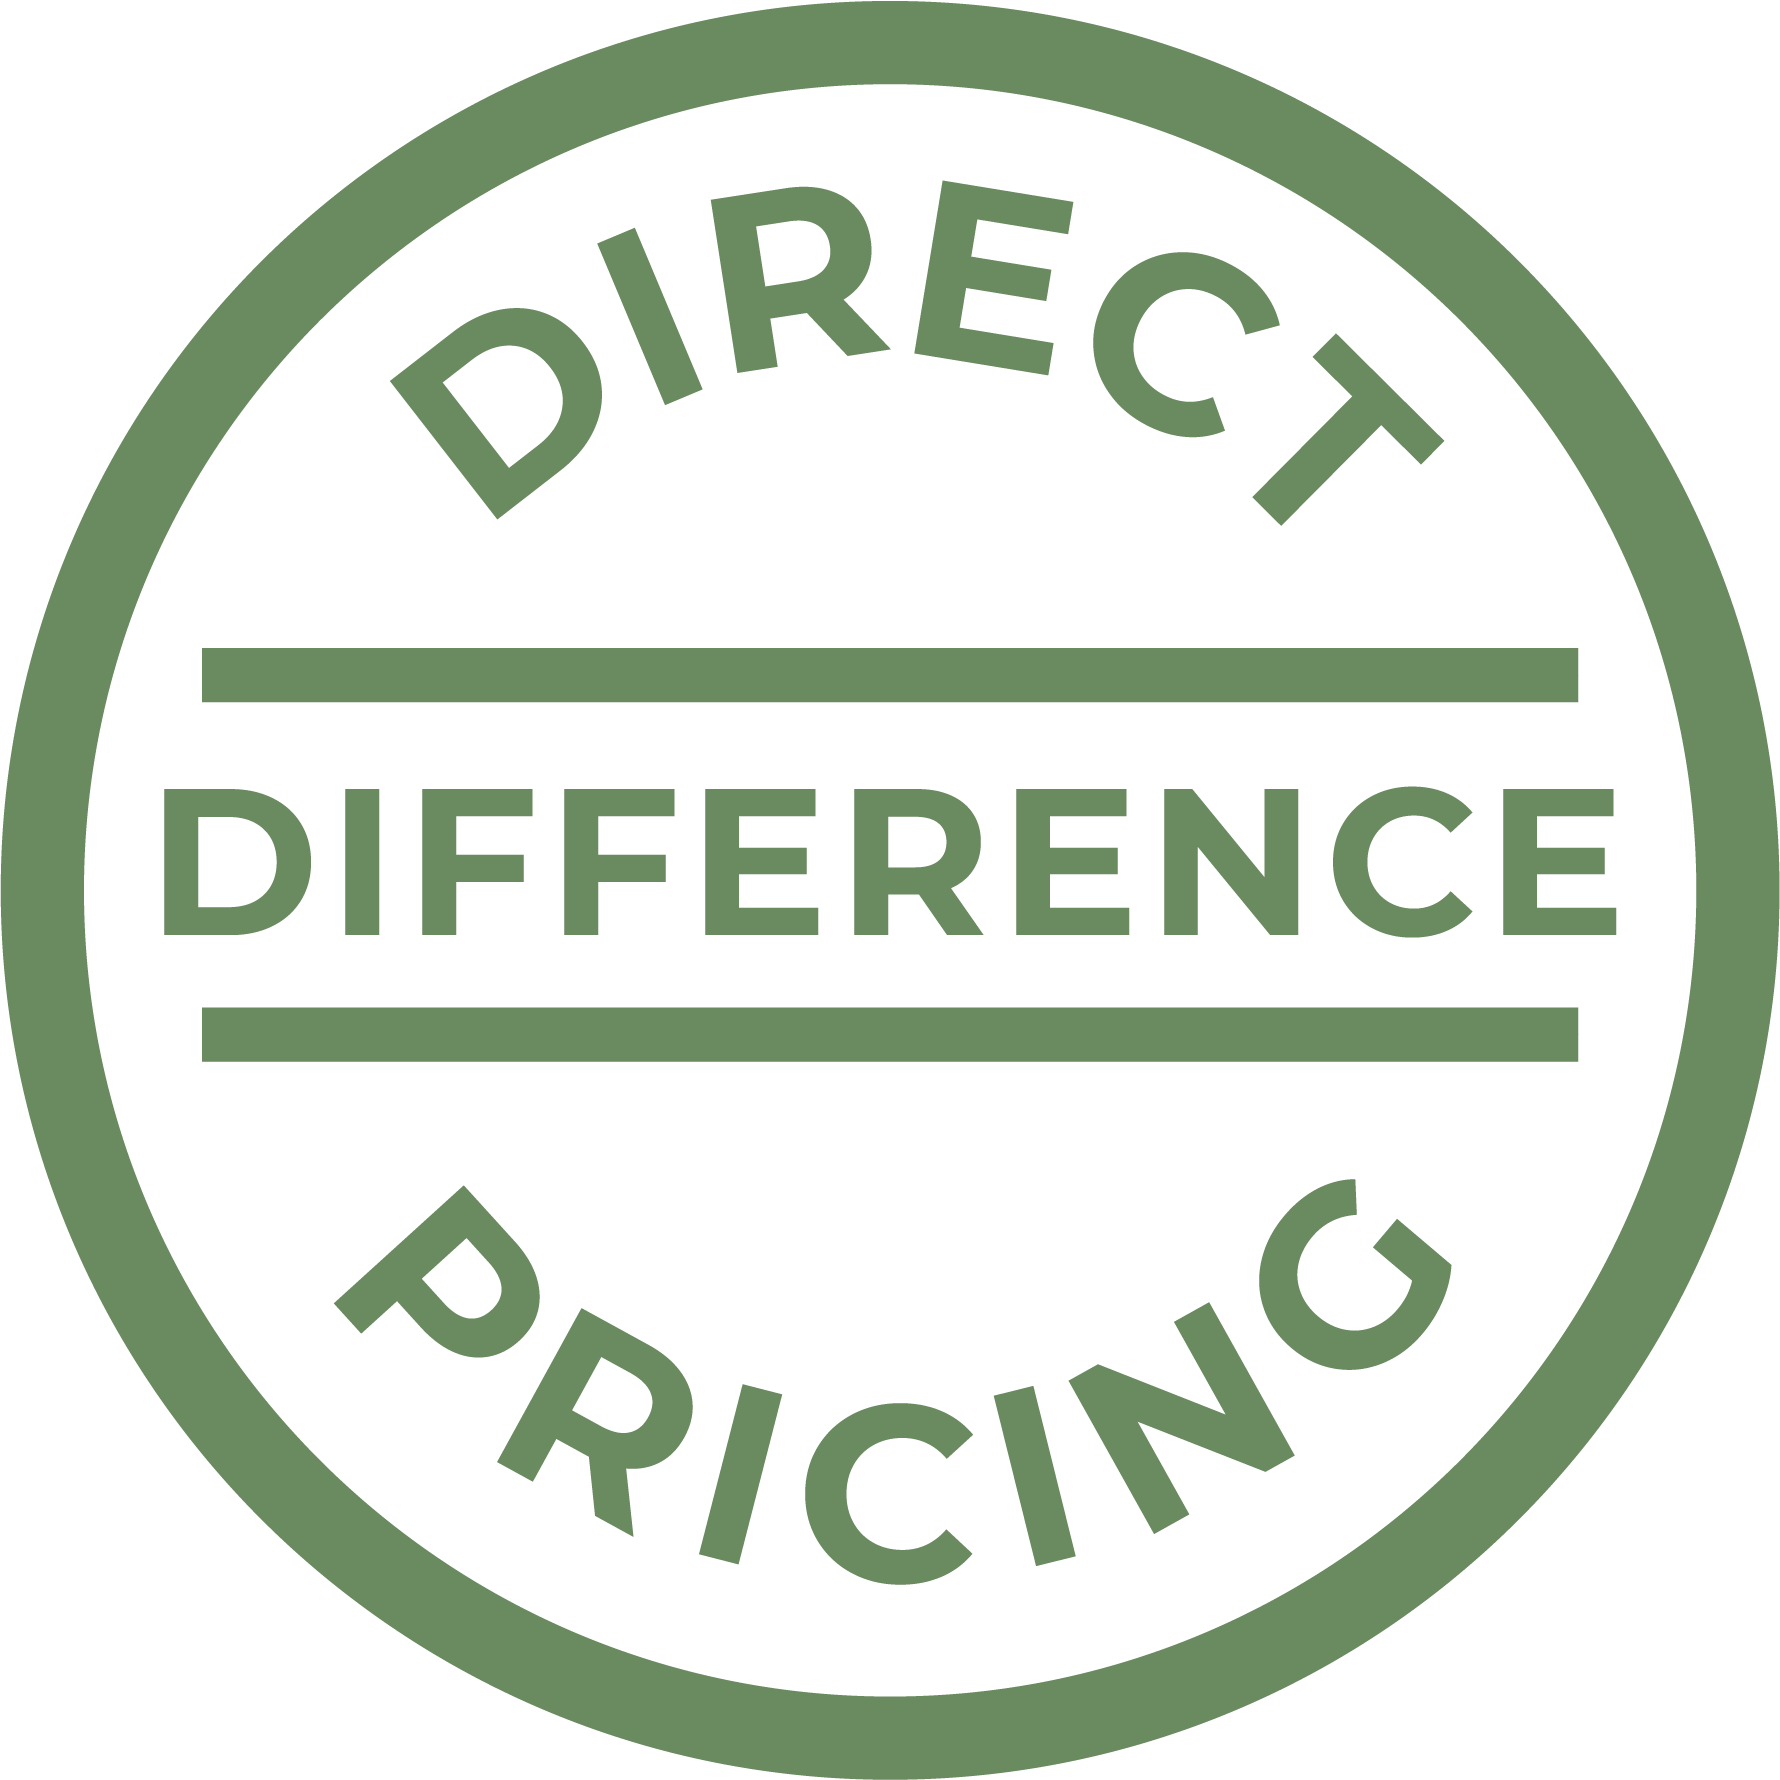 Direct Difference Pricing, Circle Medallion